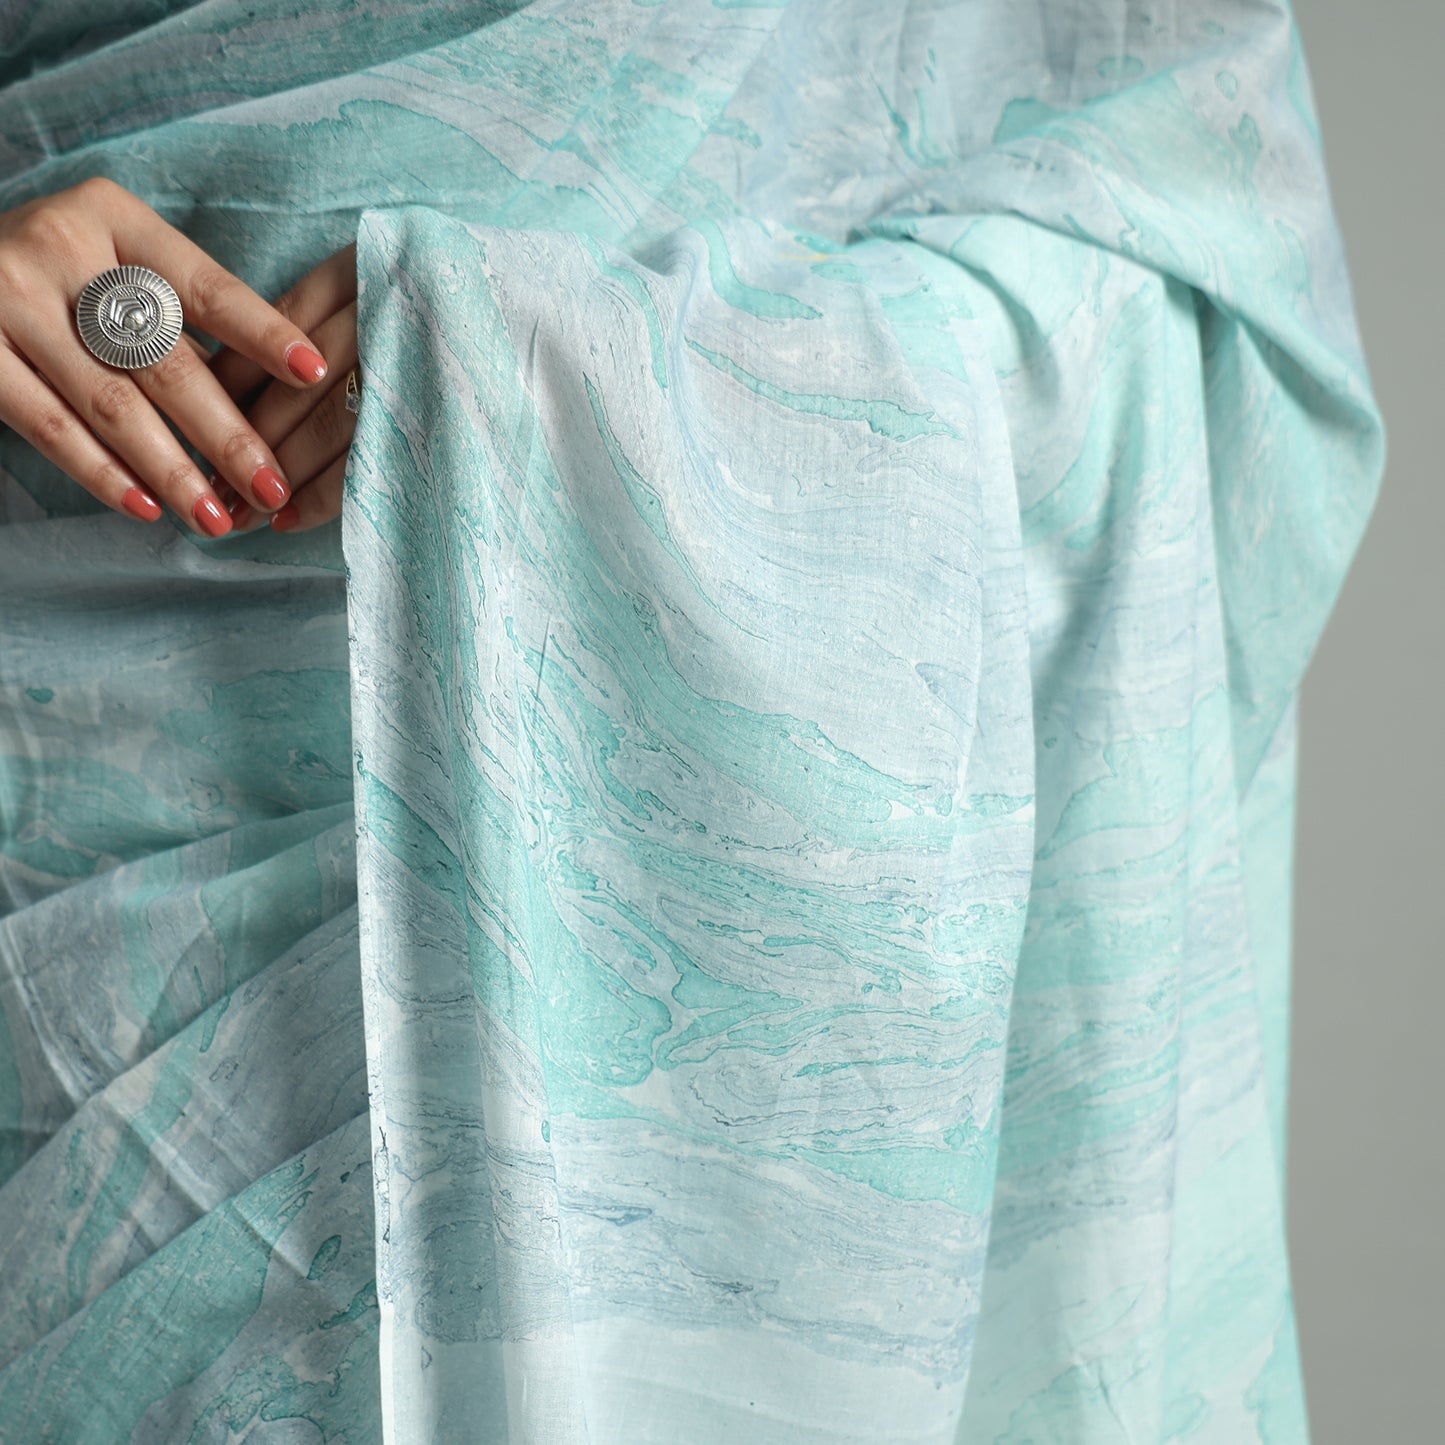 Blue - Hand Marble Printed Mul Cotton Saree 21